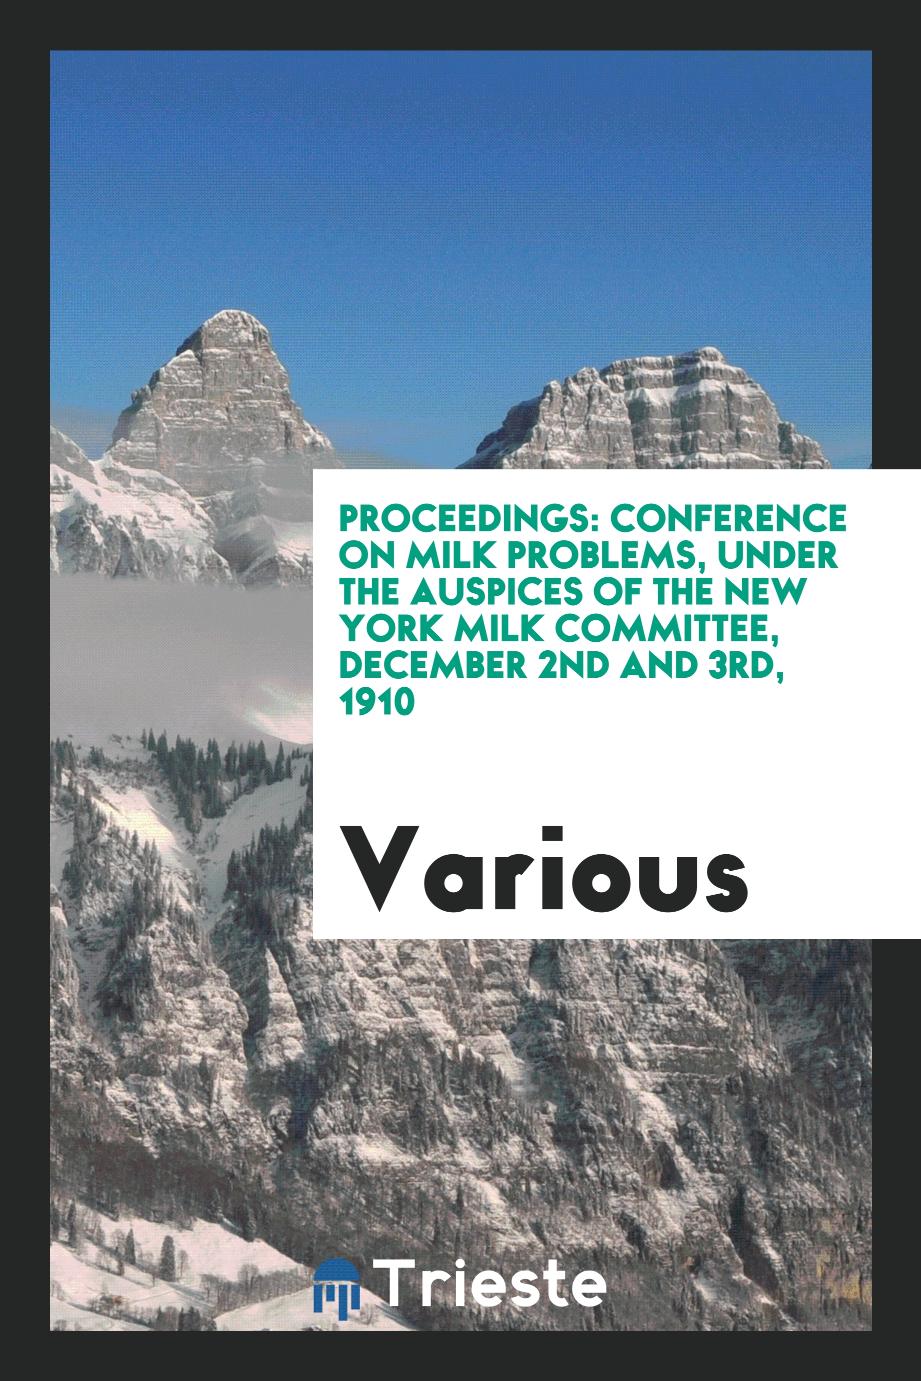 Proceedings: Conference on milk problems, under the auspices of the New York milk committee, December 2nd and 3rd, 1910